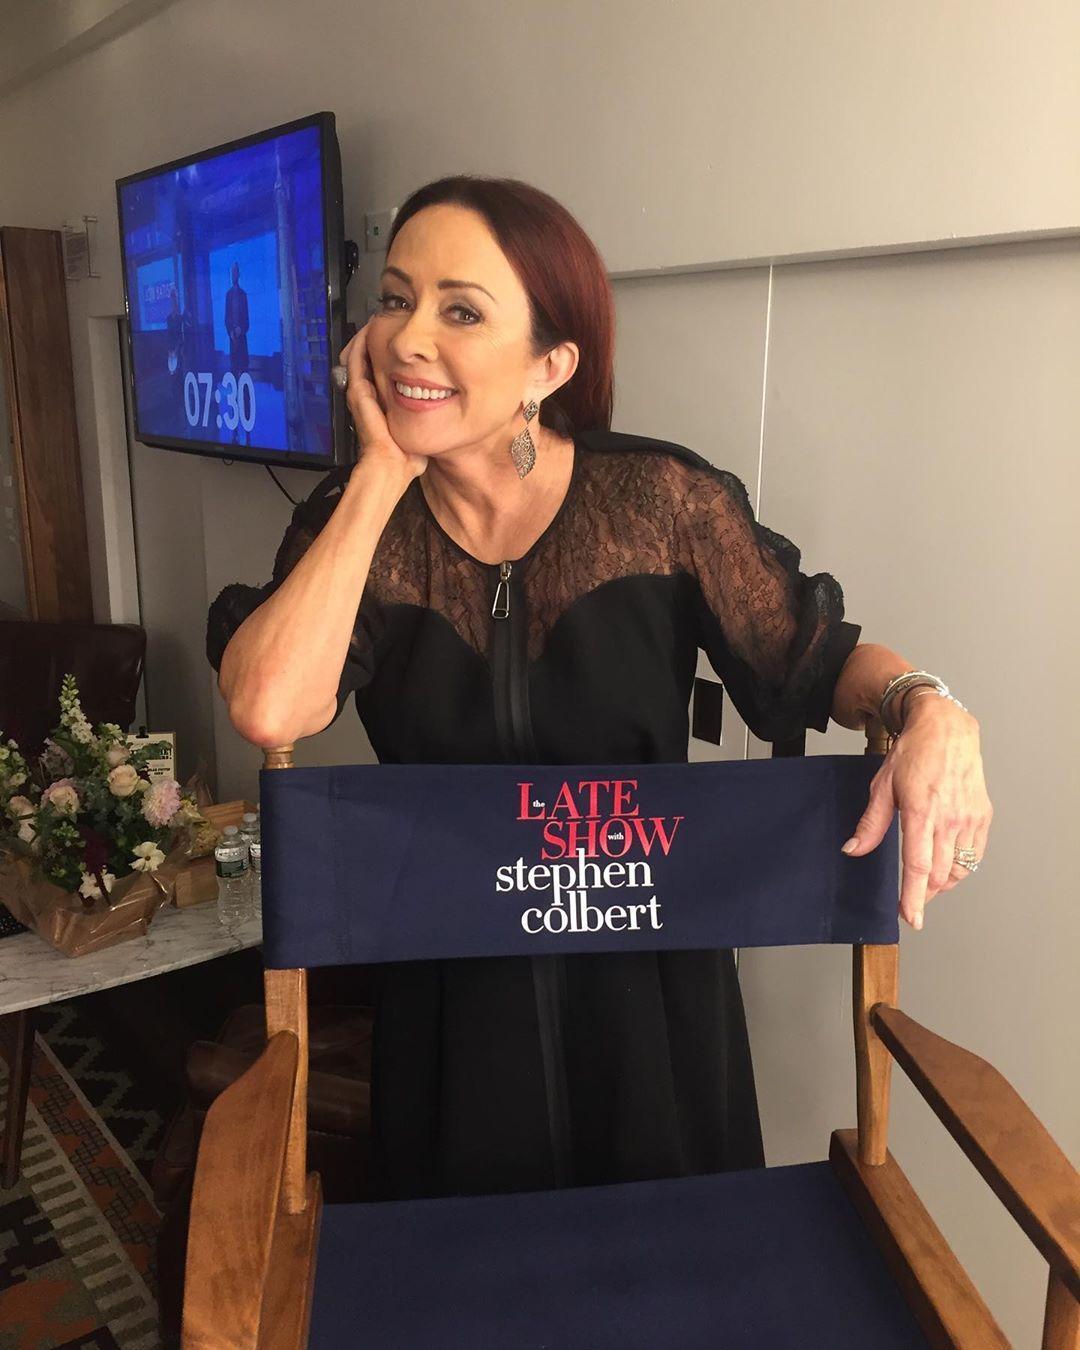 75+ Hot Pictures Of Patricia Heaton Are So Damn Sexy That We Don’t Deserve Her | Best Of Comic Books